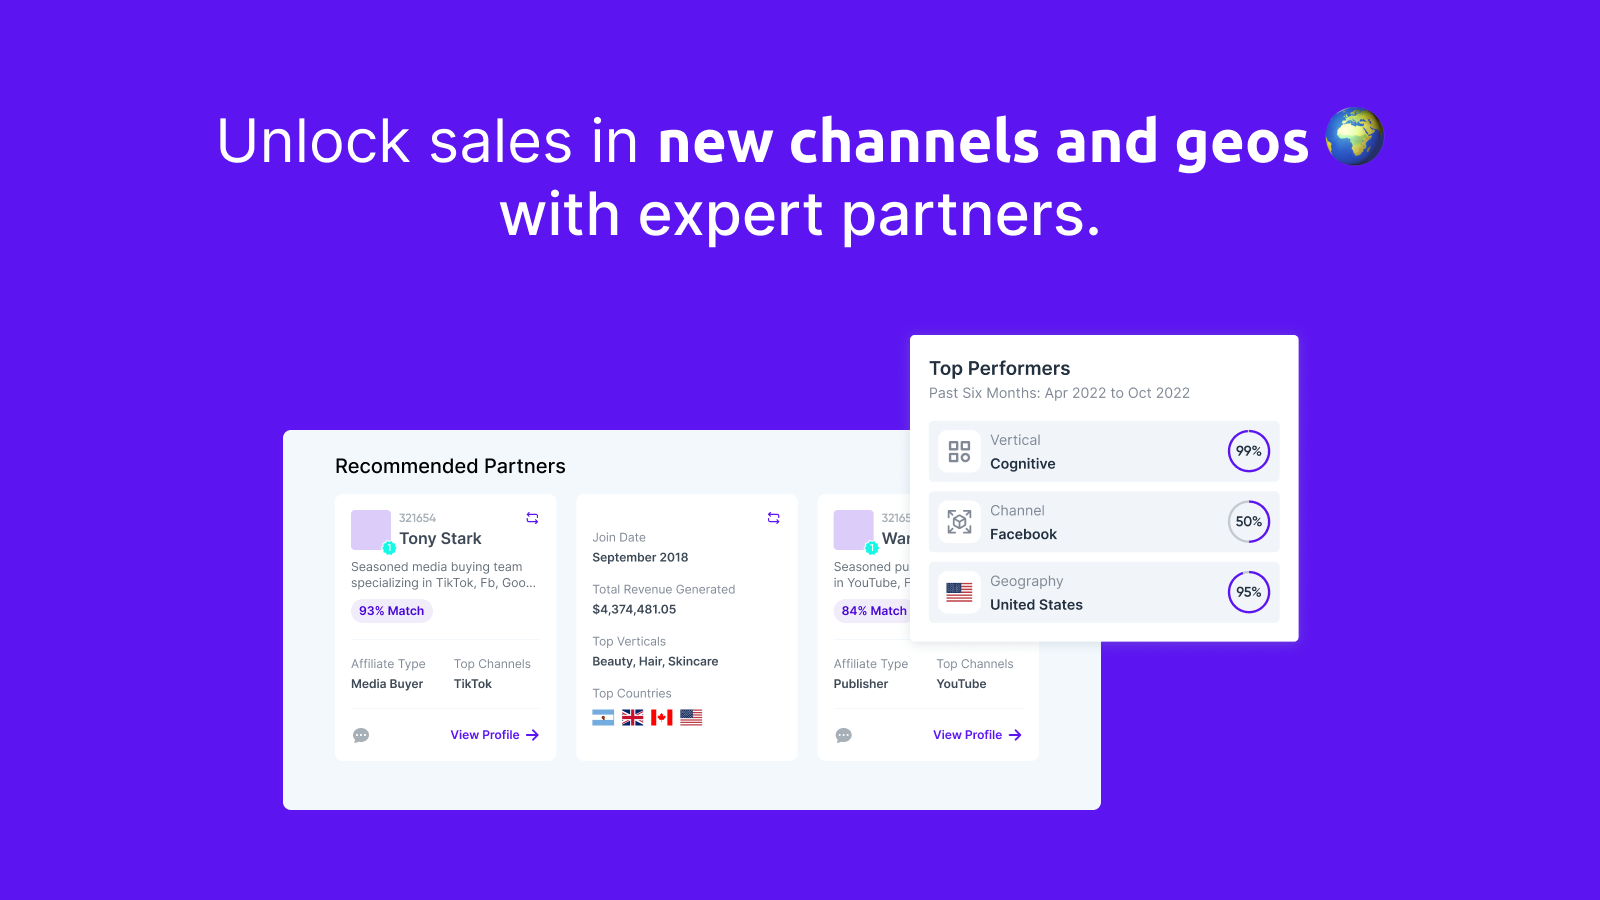 Unlock sales in new channels and geos with expert partners